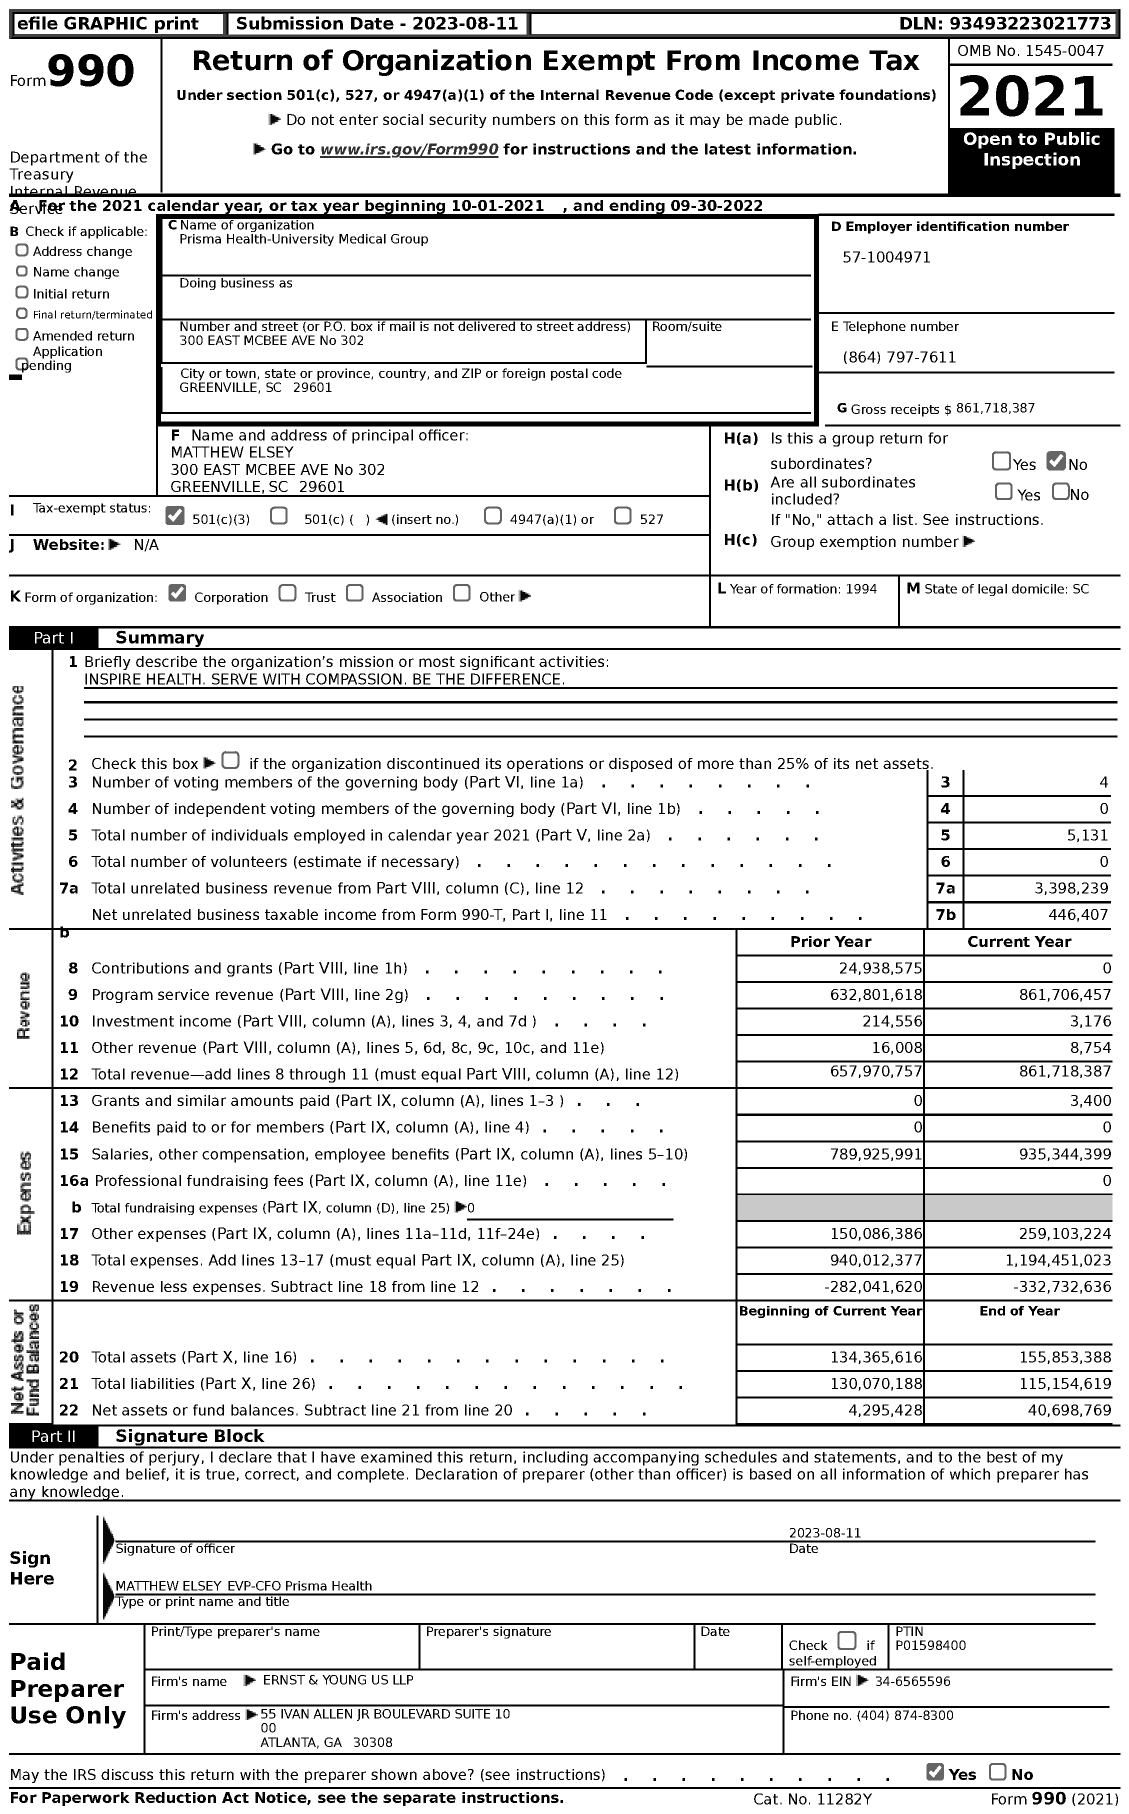 Image of first page of 2021 Form 990 for Prisma Health-University Medical Group